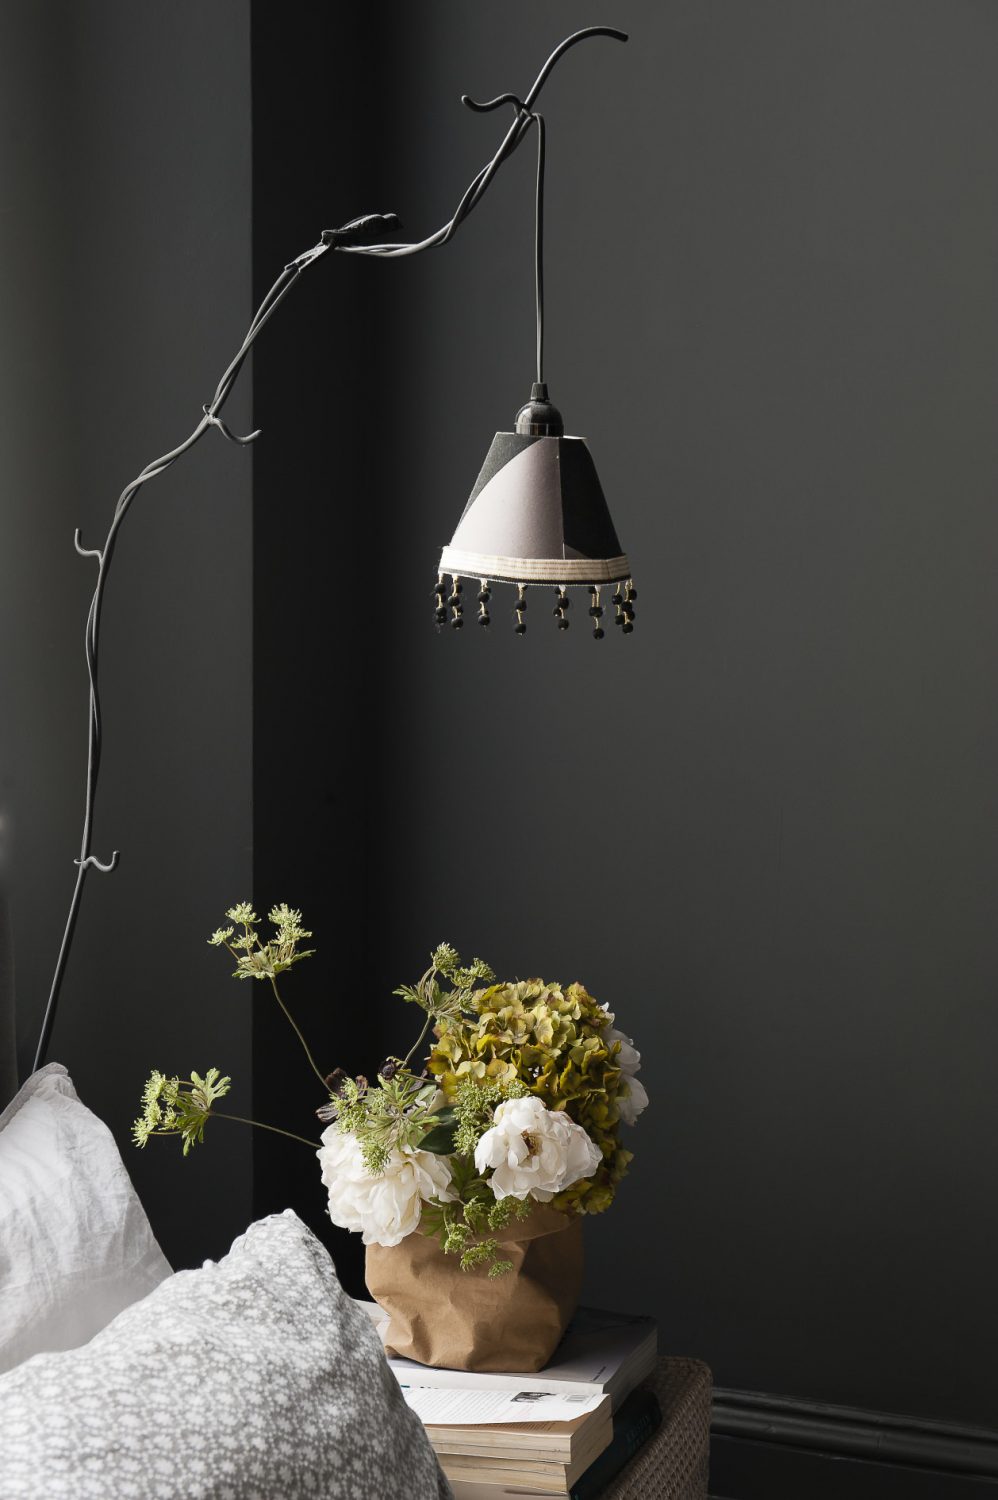 A beautiful twig-like metal floor lamp with a beaded shade acts as a bedside light